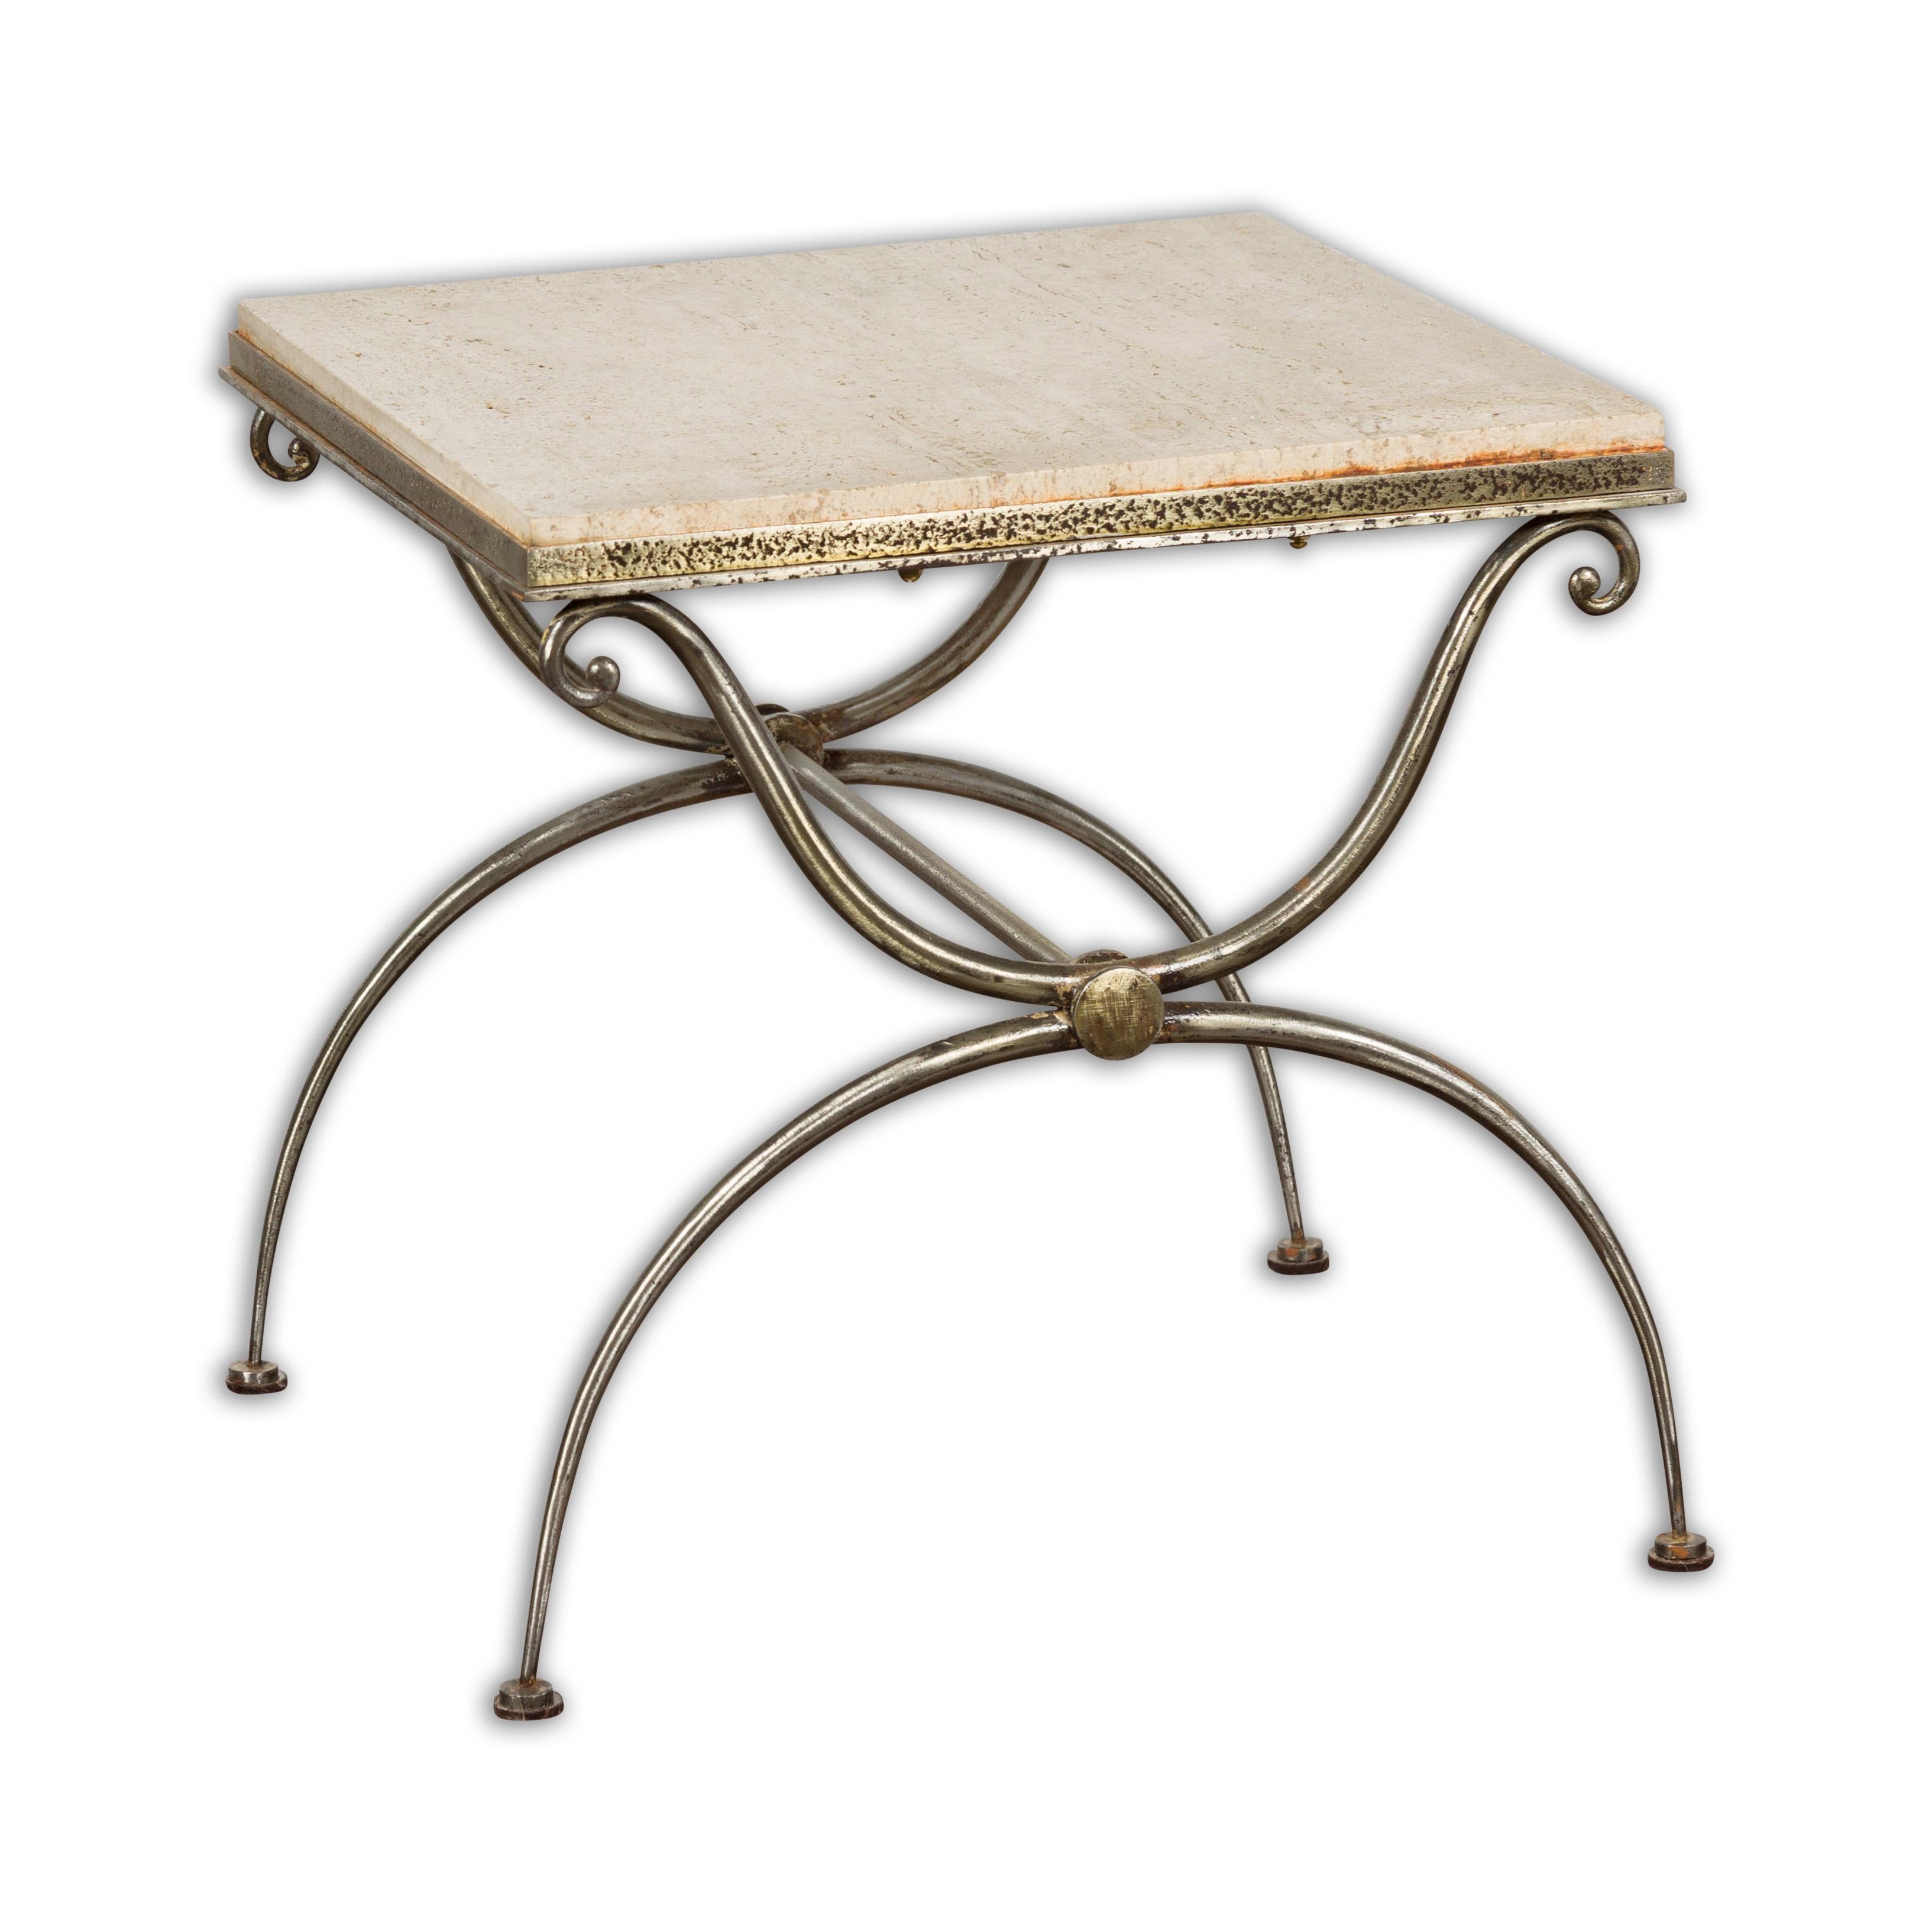 A French Midcentury steel side table with marble top, scrolling supports and arching half-moon legs. A French Midcentury steel side table, reflecting a harmonious blend of form and function in a typical mid-20th-century aesthetic. This piece is